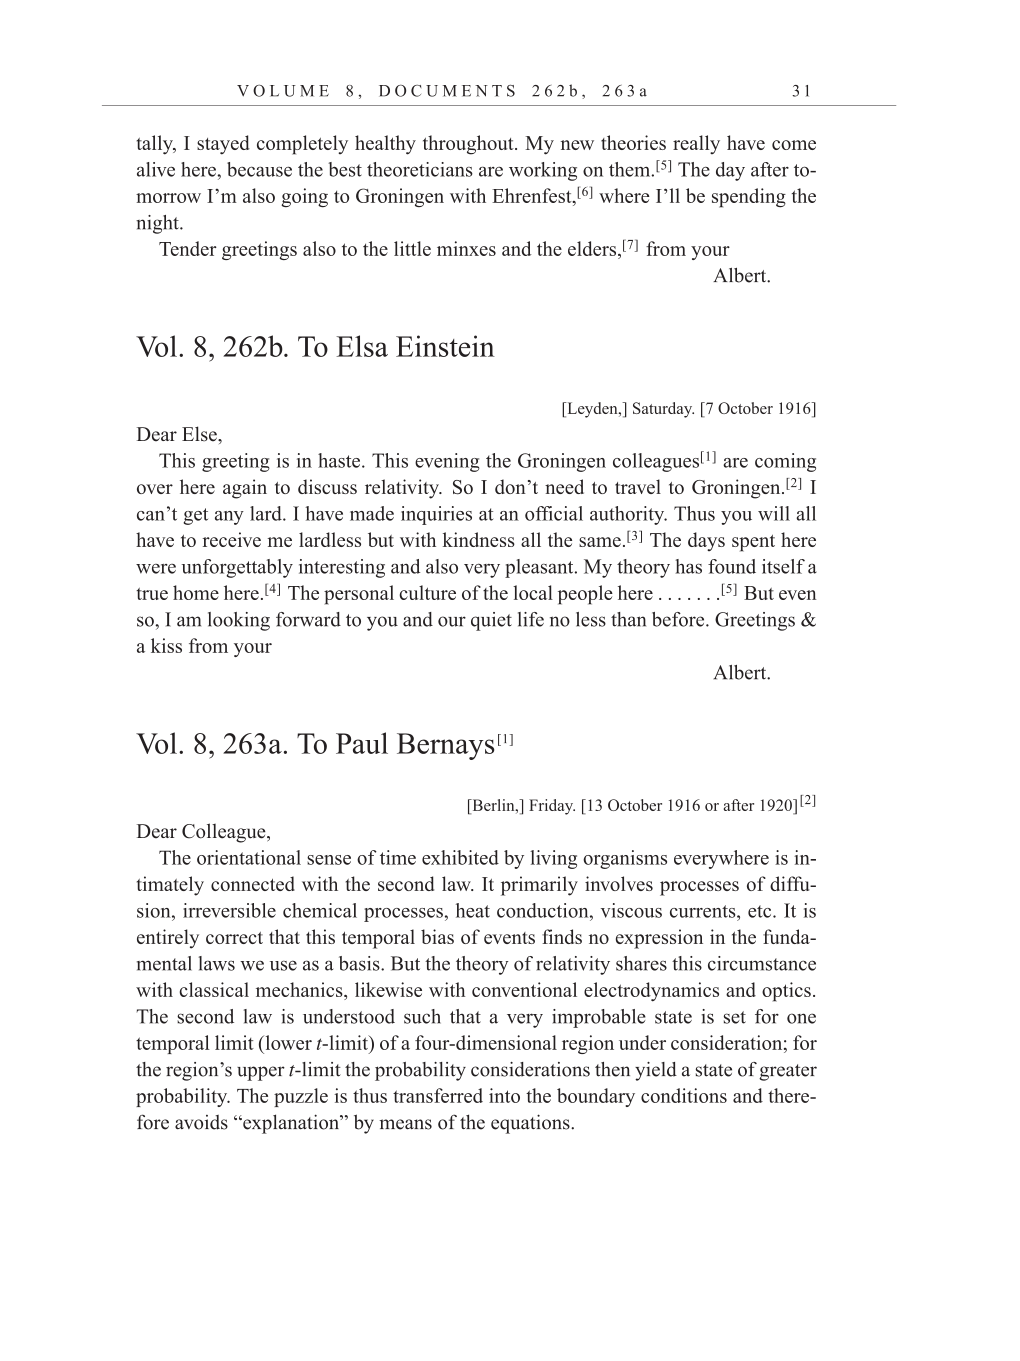 Volume 10: The Berlin Years: Correspondence, May-December 1920, and Supplementary Correspondence, 1909-1920 (English translation supplement) page 31